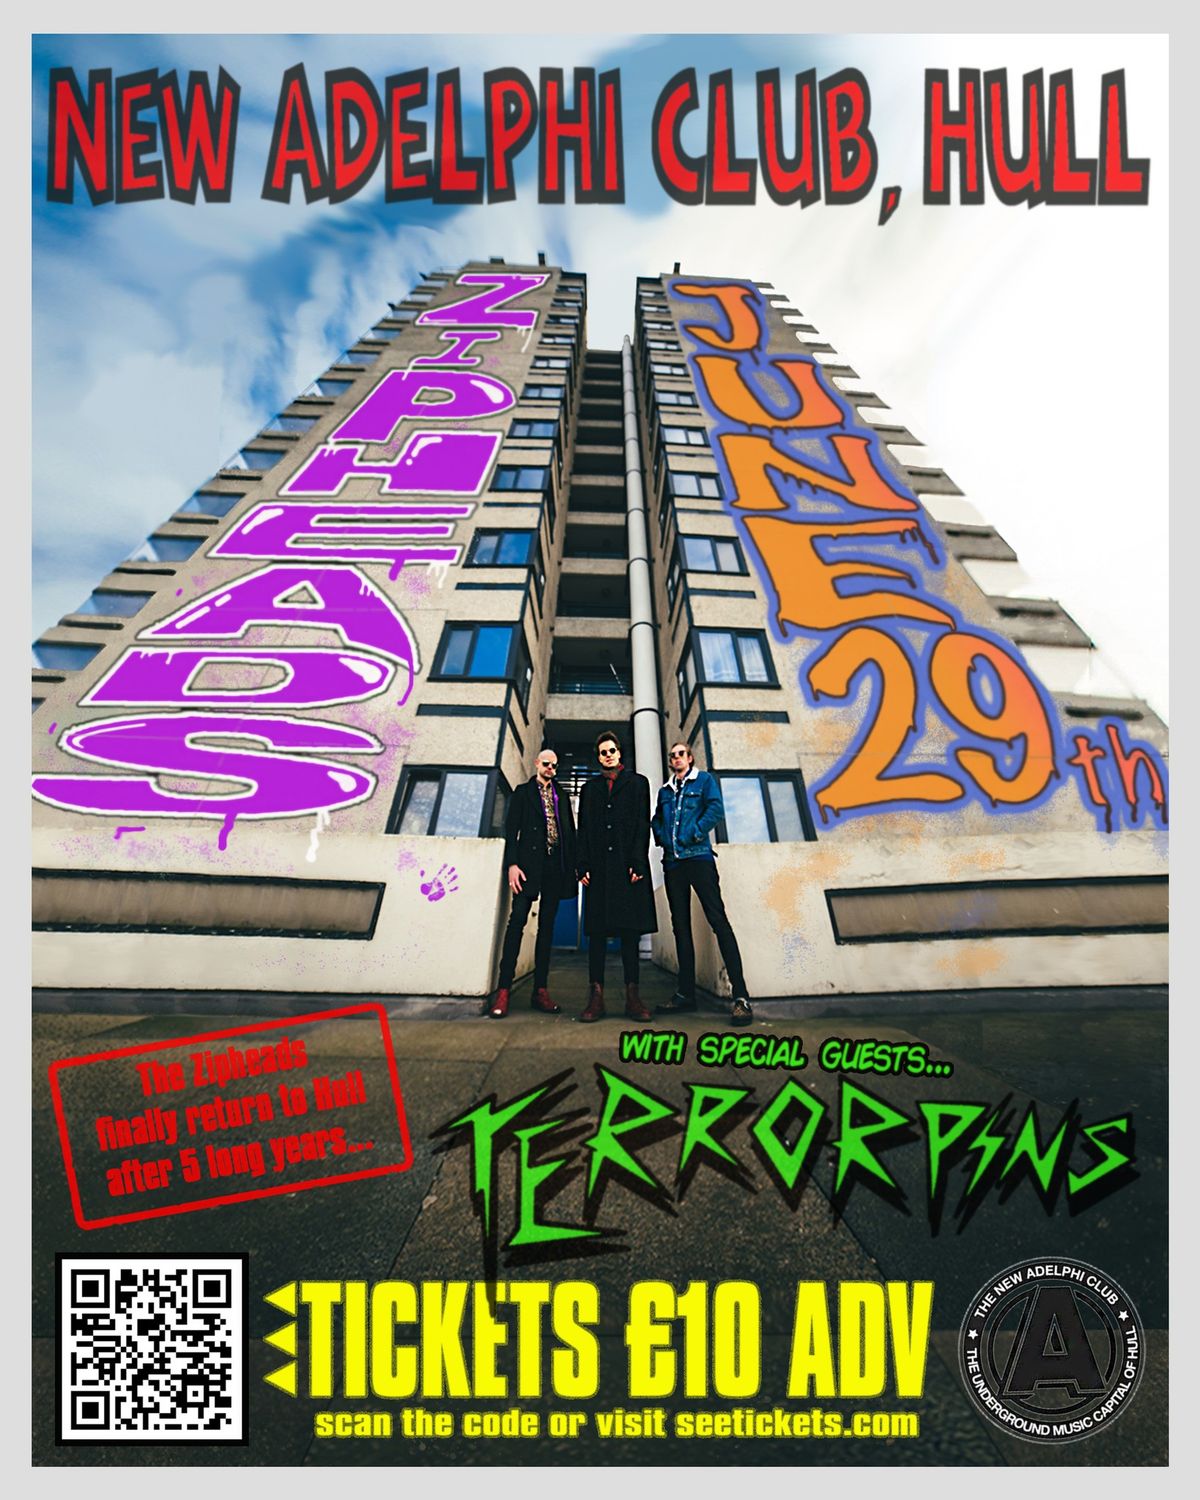 THE ZIPHEADS RETURN TO HULL AFTER 5 YEARS- with Terrorpins